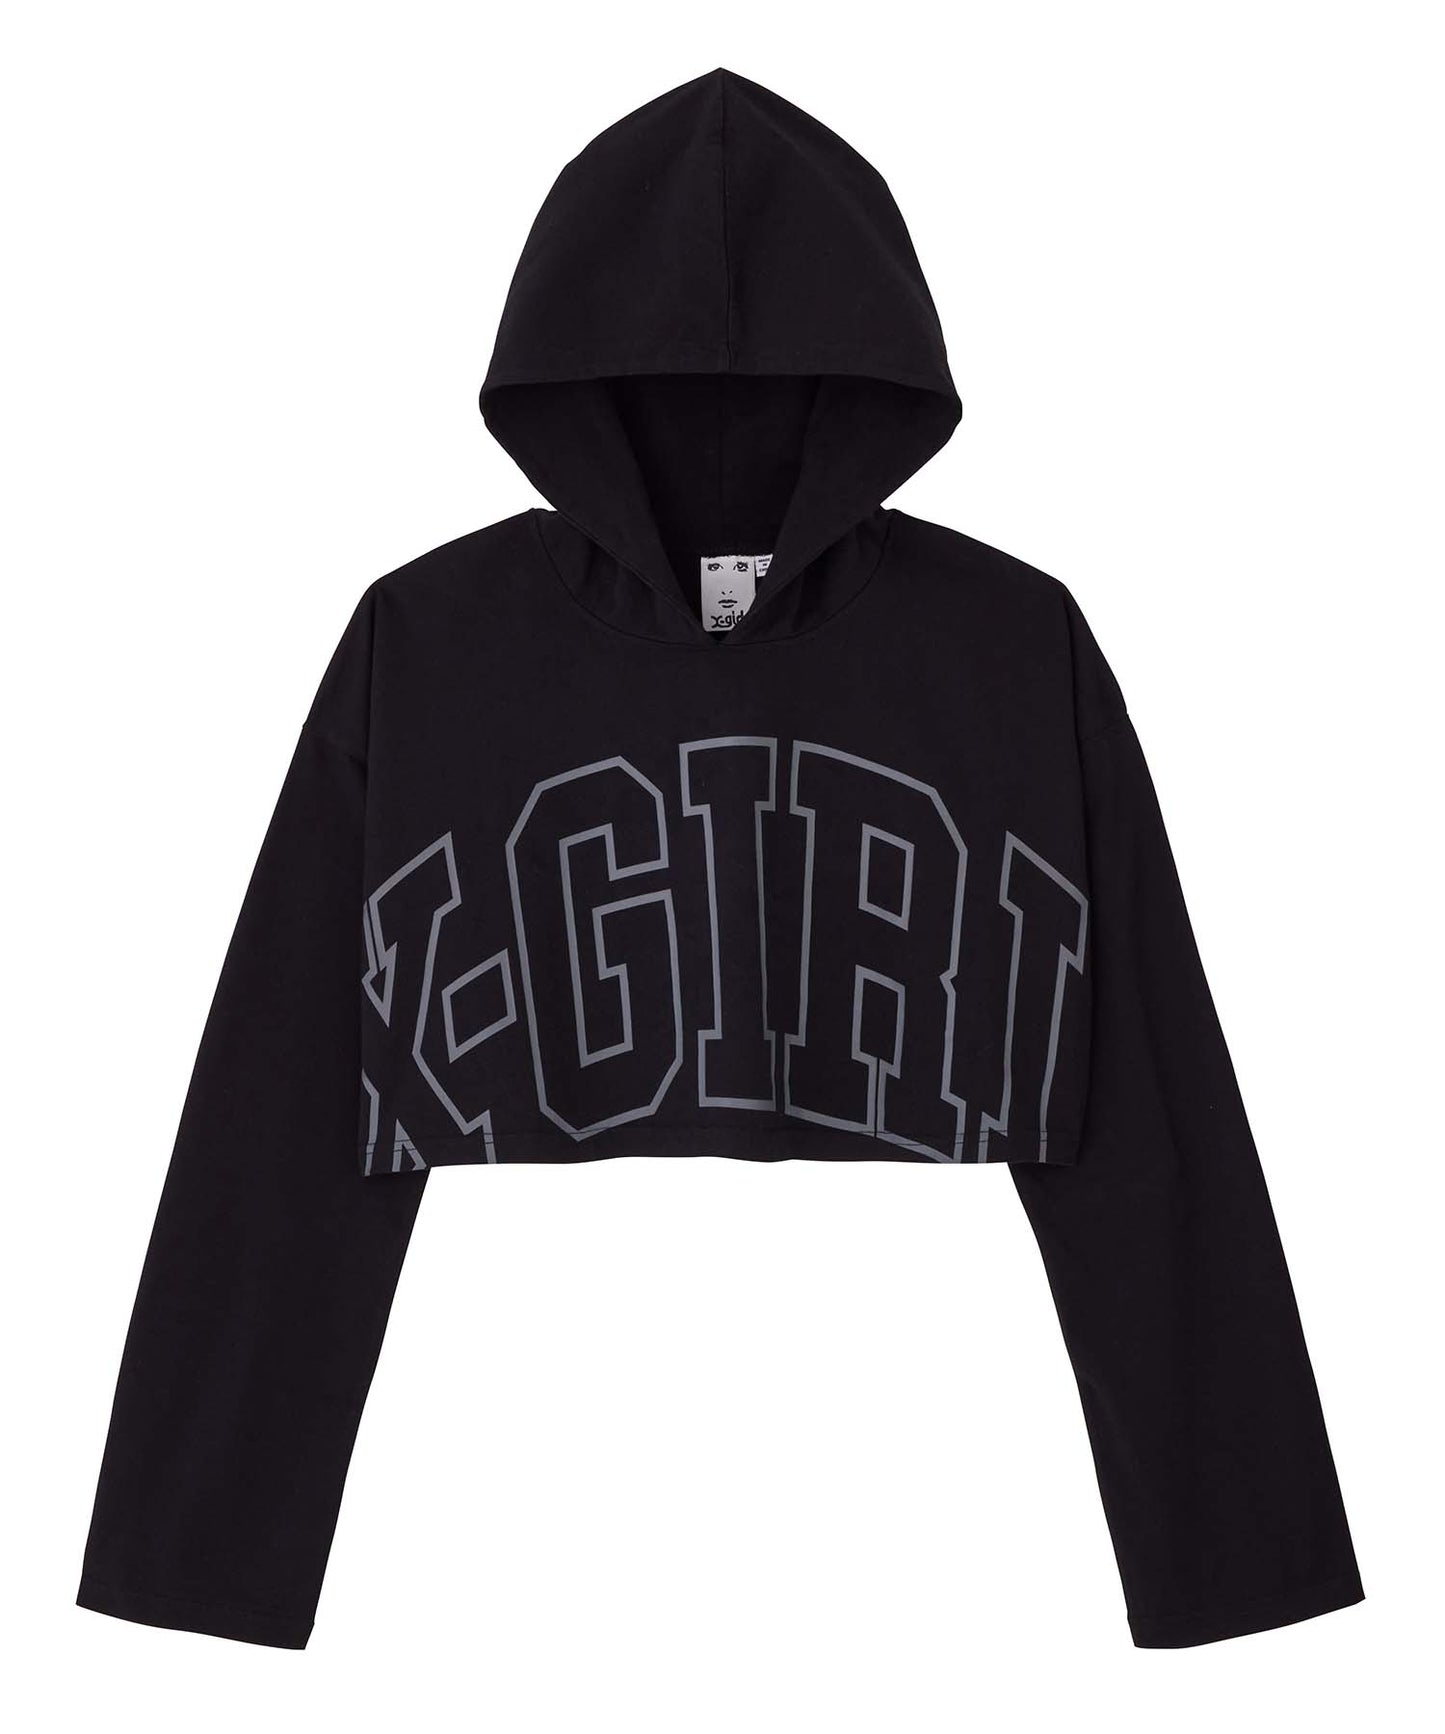 LOGO HOODED CROPPED TOP